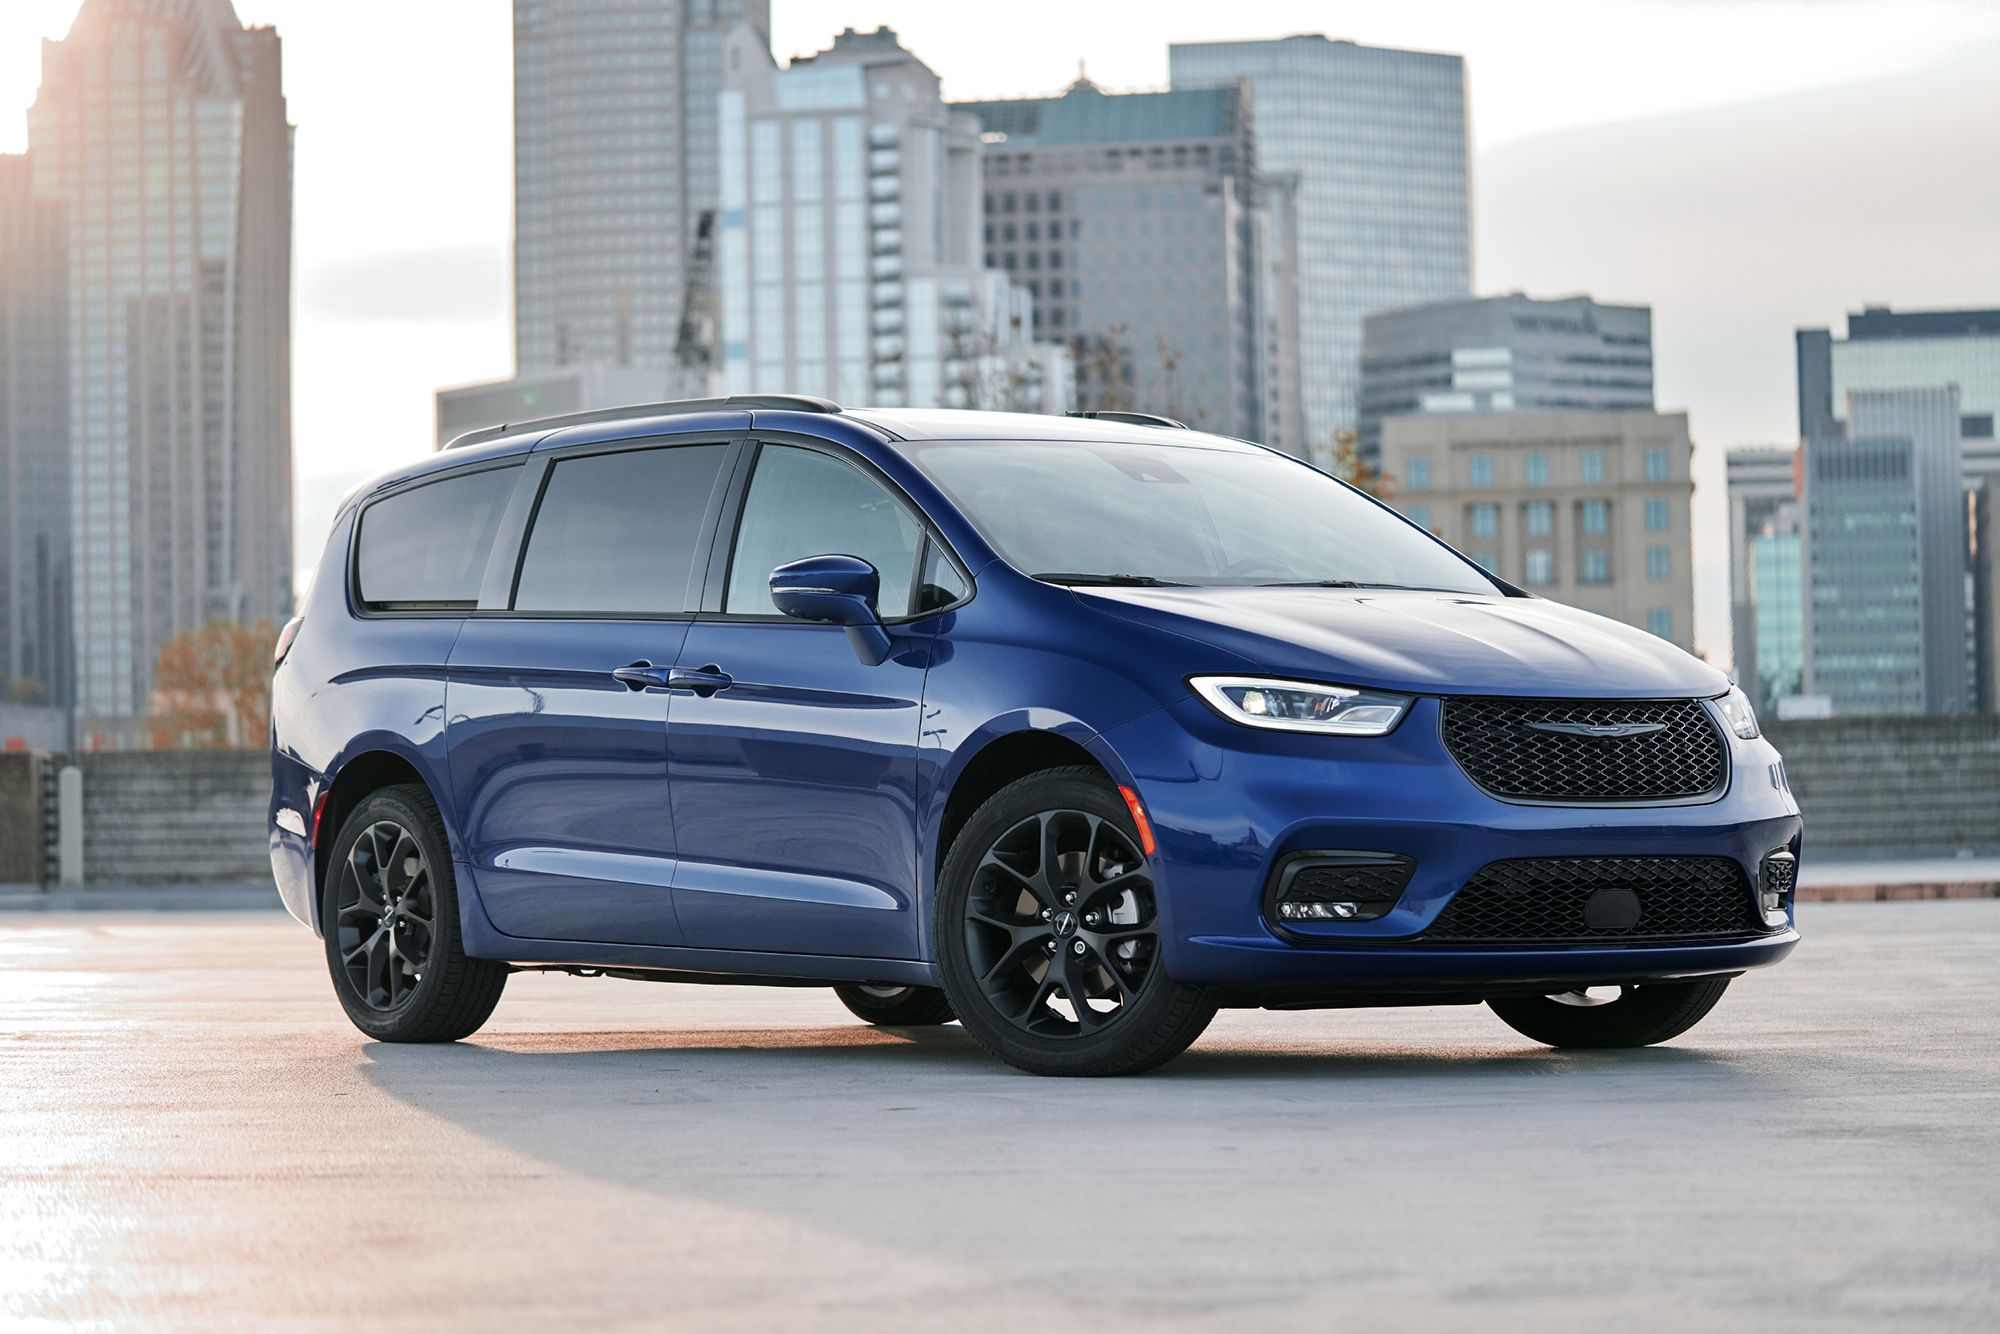 Minivans are making a huge comeback. Here's why | CNN Business